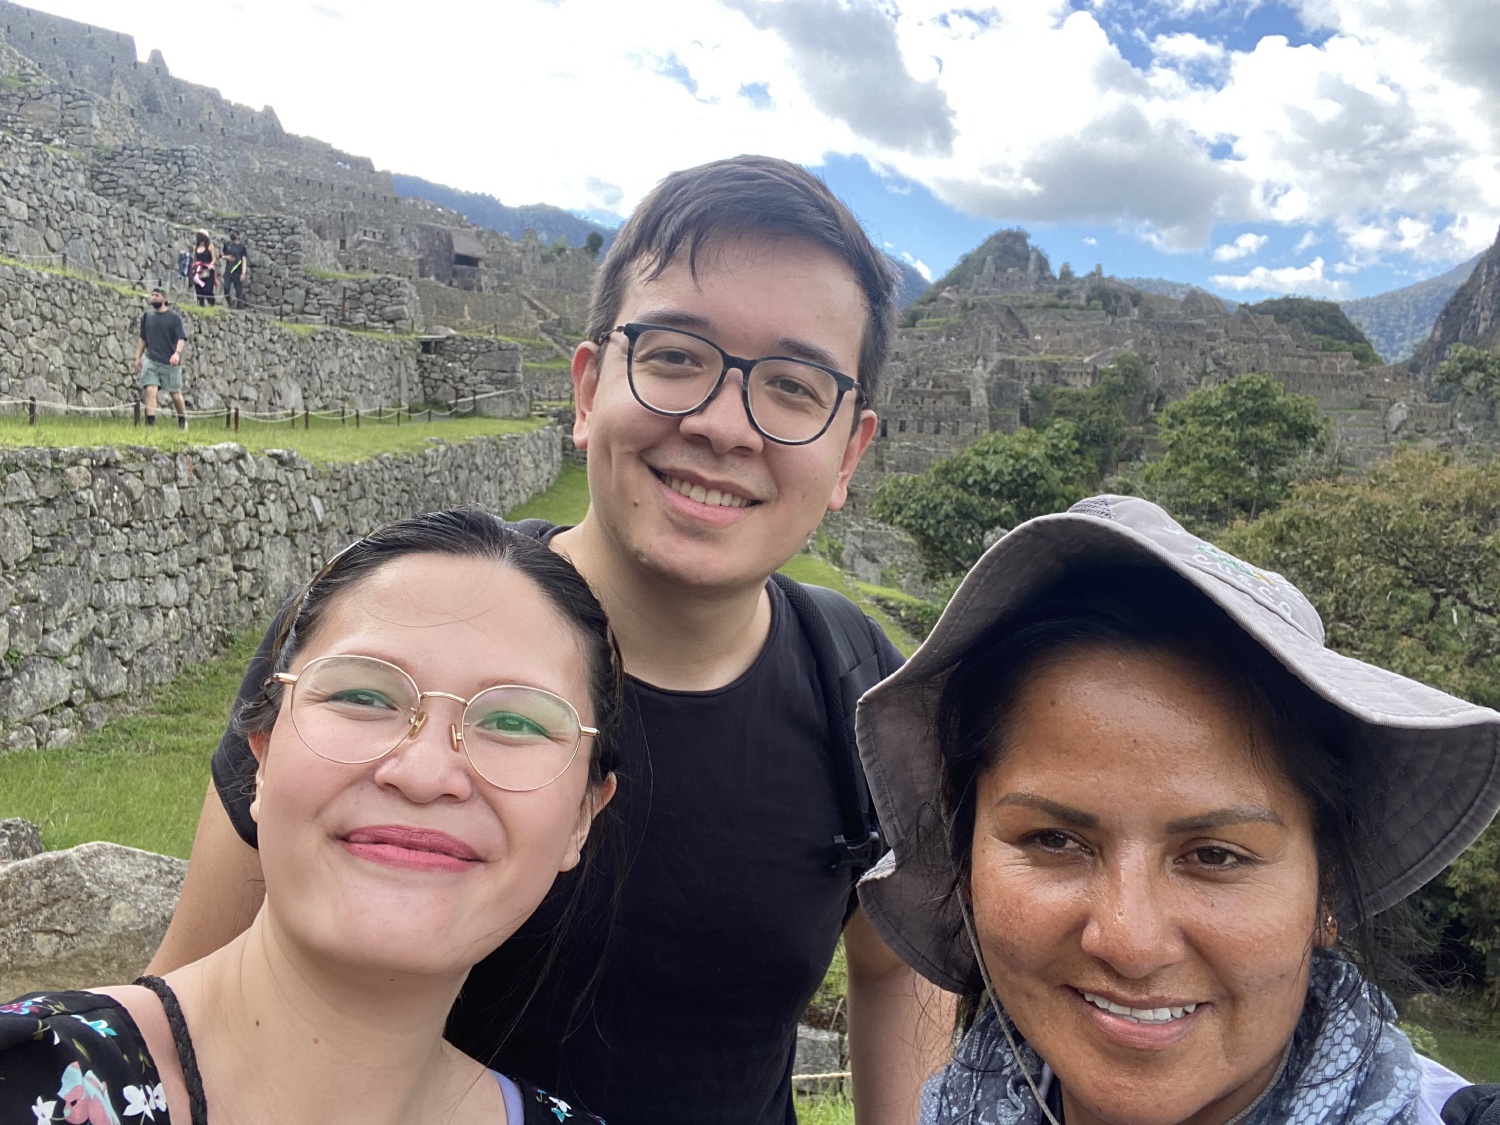 Thank you so much Eugenia for sharing with us the wonders of Machu Picchu! Hasta luego!